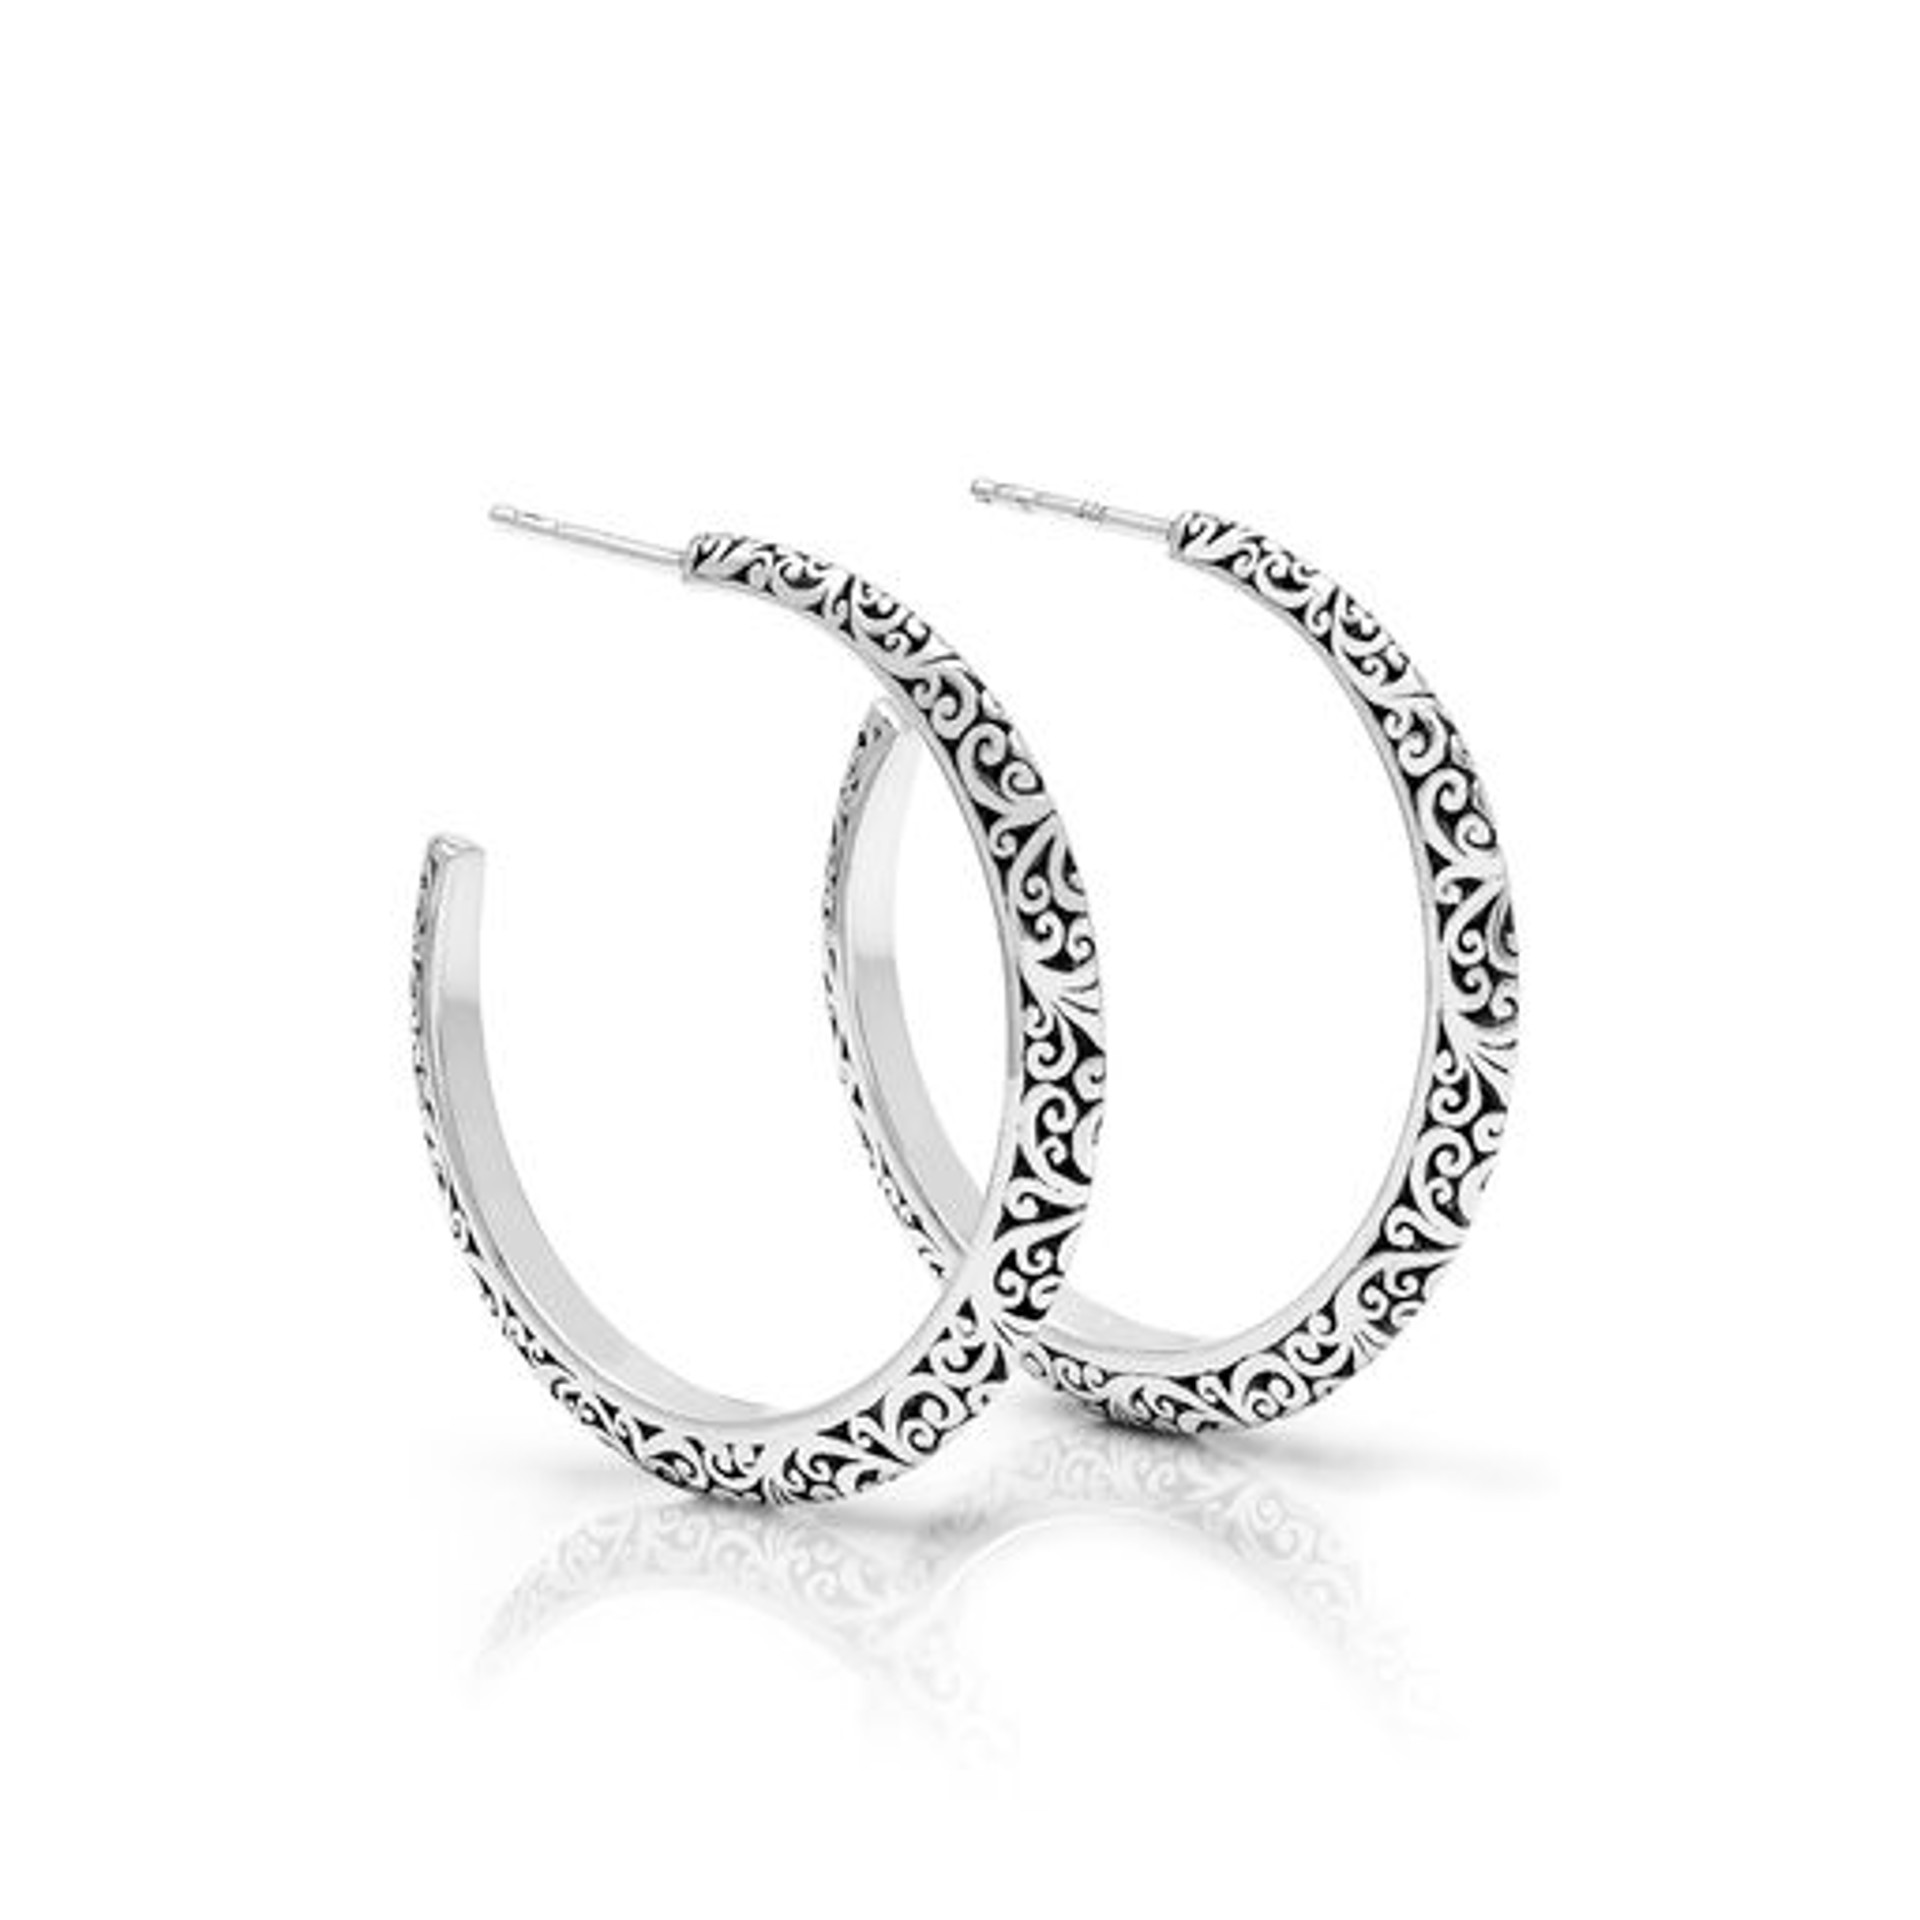 6963 Sterling Silver Hoops with Carving Design by Lois Hill